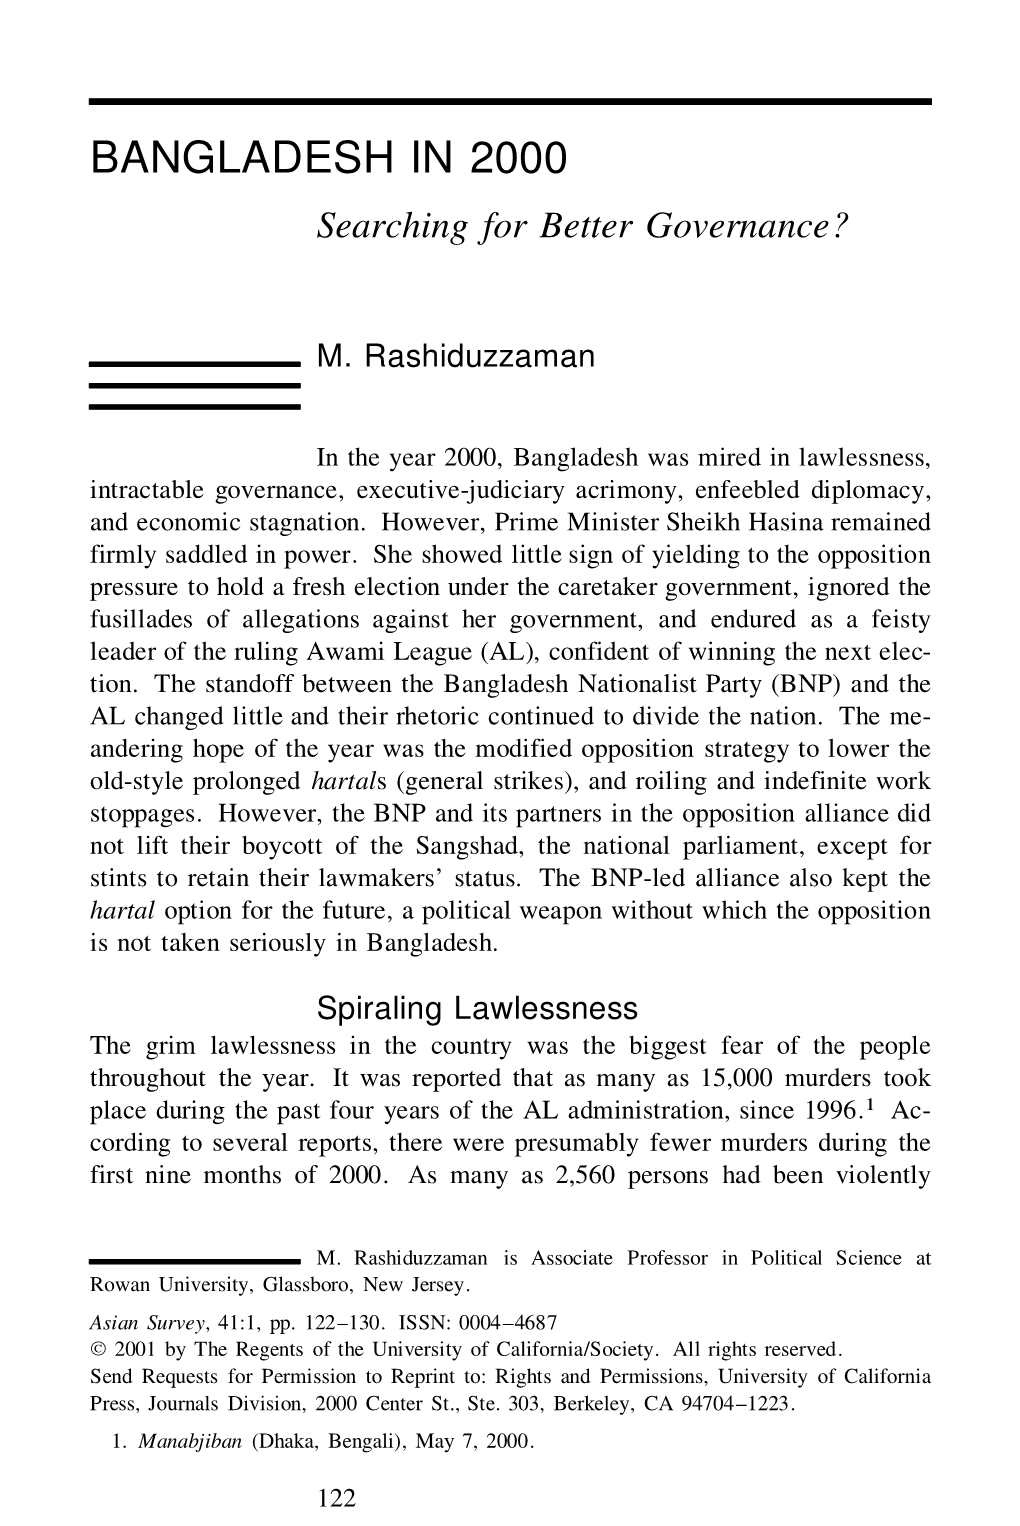 BANGLADESH in 2000 Searching for Better Governance?